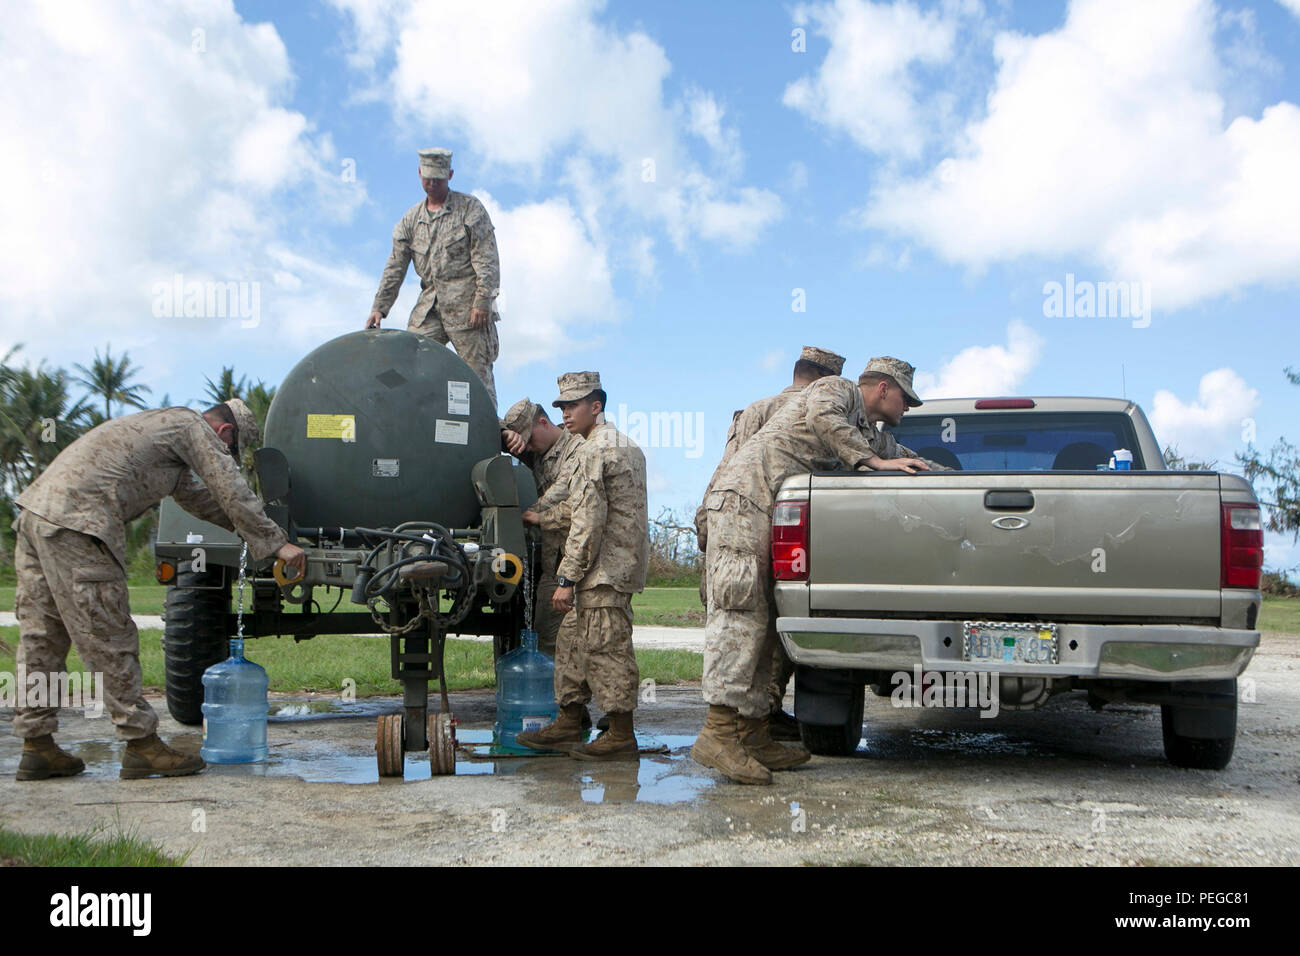 U.S. Marines with Combat Logistics Battalion 31, 31st Marine Expeditionary Unit, distribute water to local civilians as part of typhoon relief efforts in Saipan, Aug. 11, 2015. The 31st MEU and the ships of the Bonhomme Richard Amphibious Ready Group are assisting the Federal Emergency Management Agency with distributing emergency relief supplies to Saipan after the island was struck by Typhoon Soudelor, Aug. 2-3. (U.S. Marine Corps photo by Lance Cpl. Brian Bekkala/Released.) Stock Photo